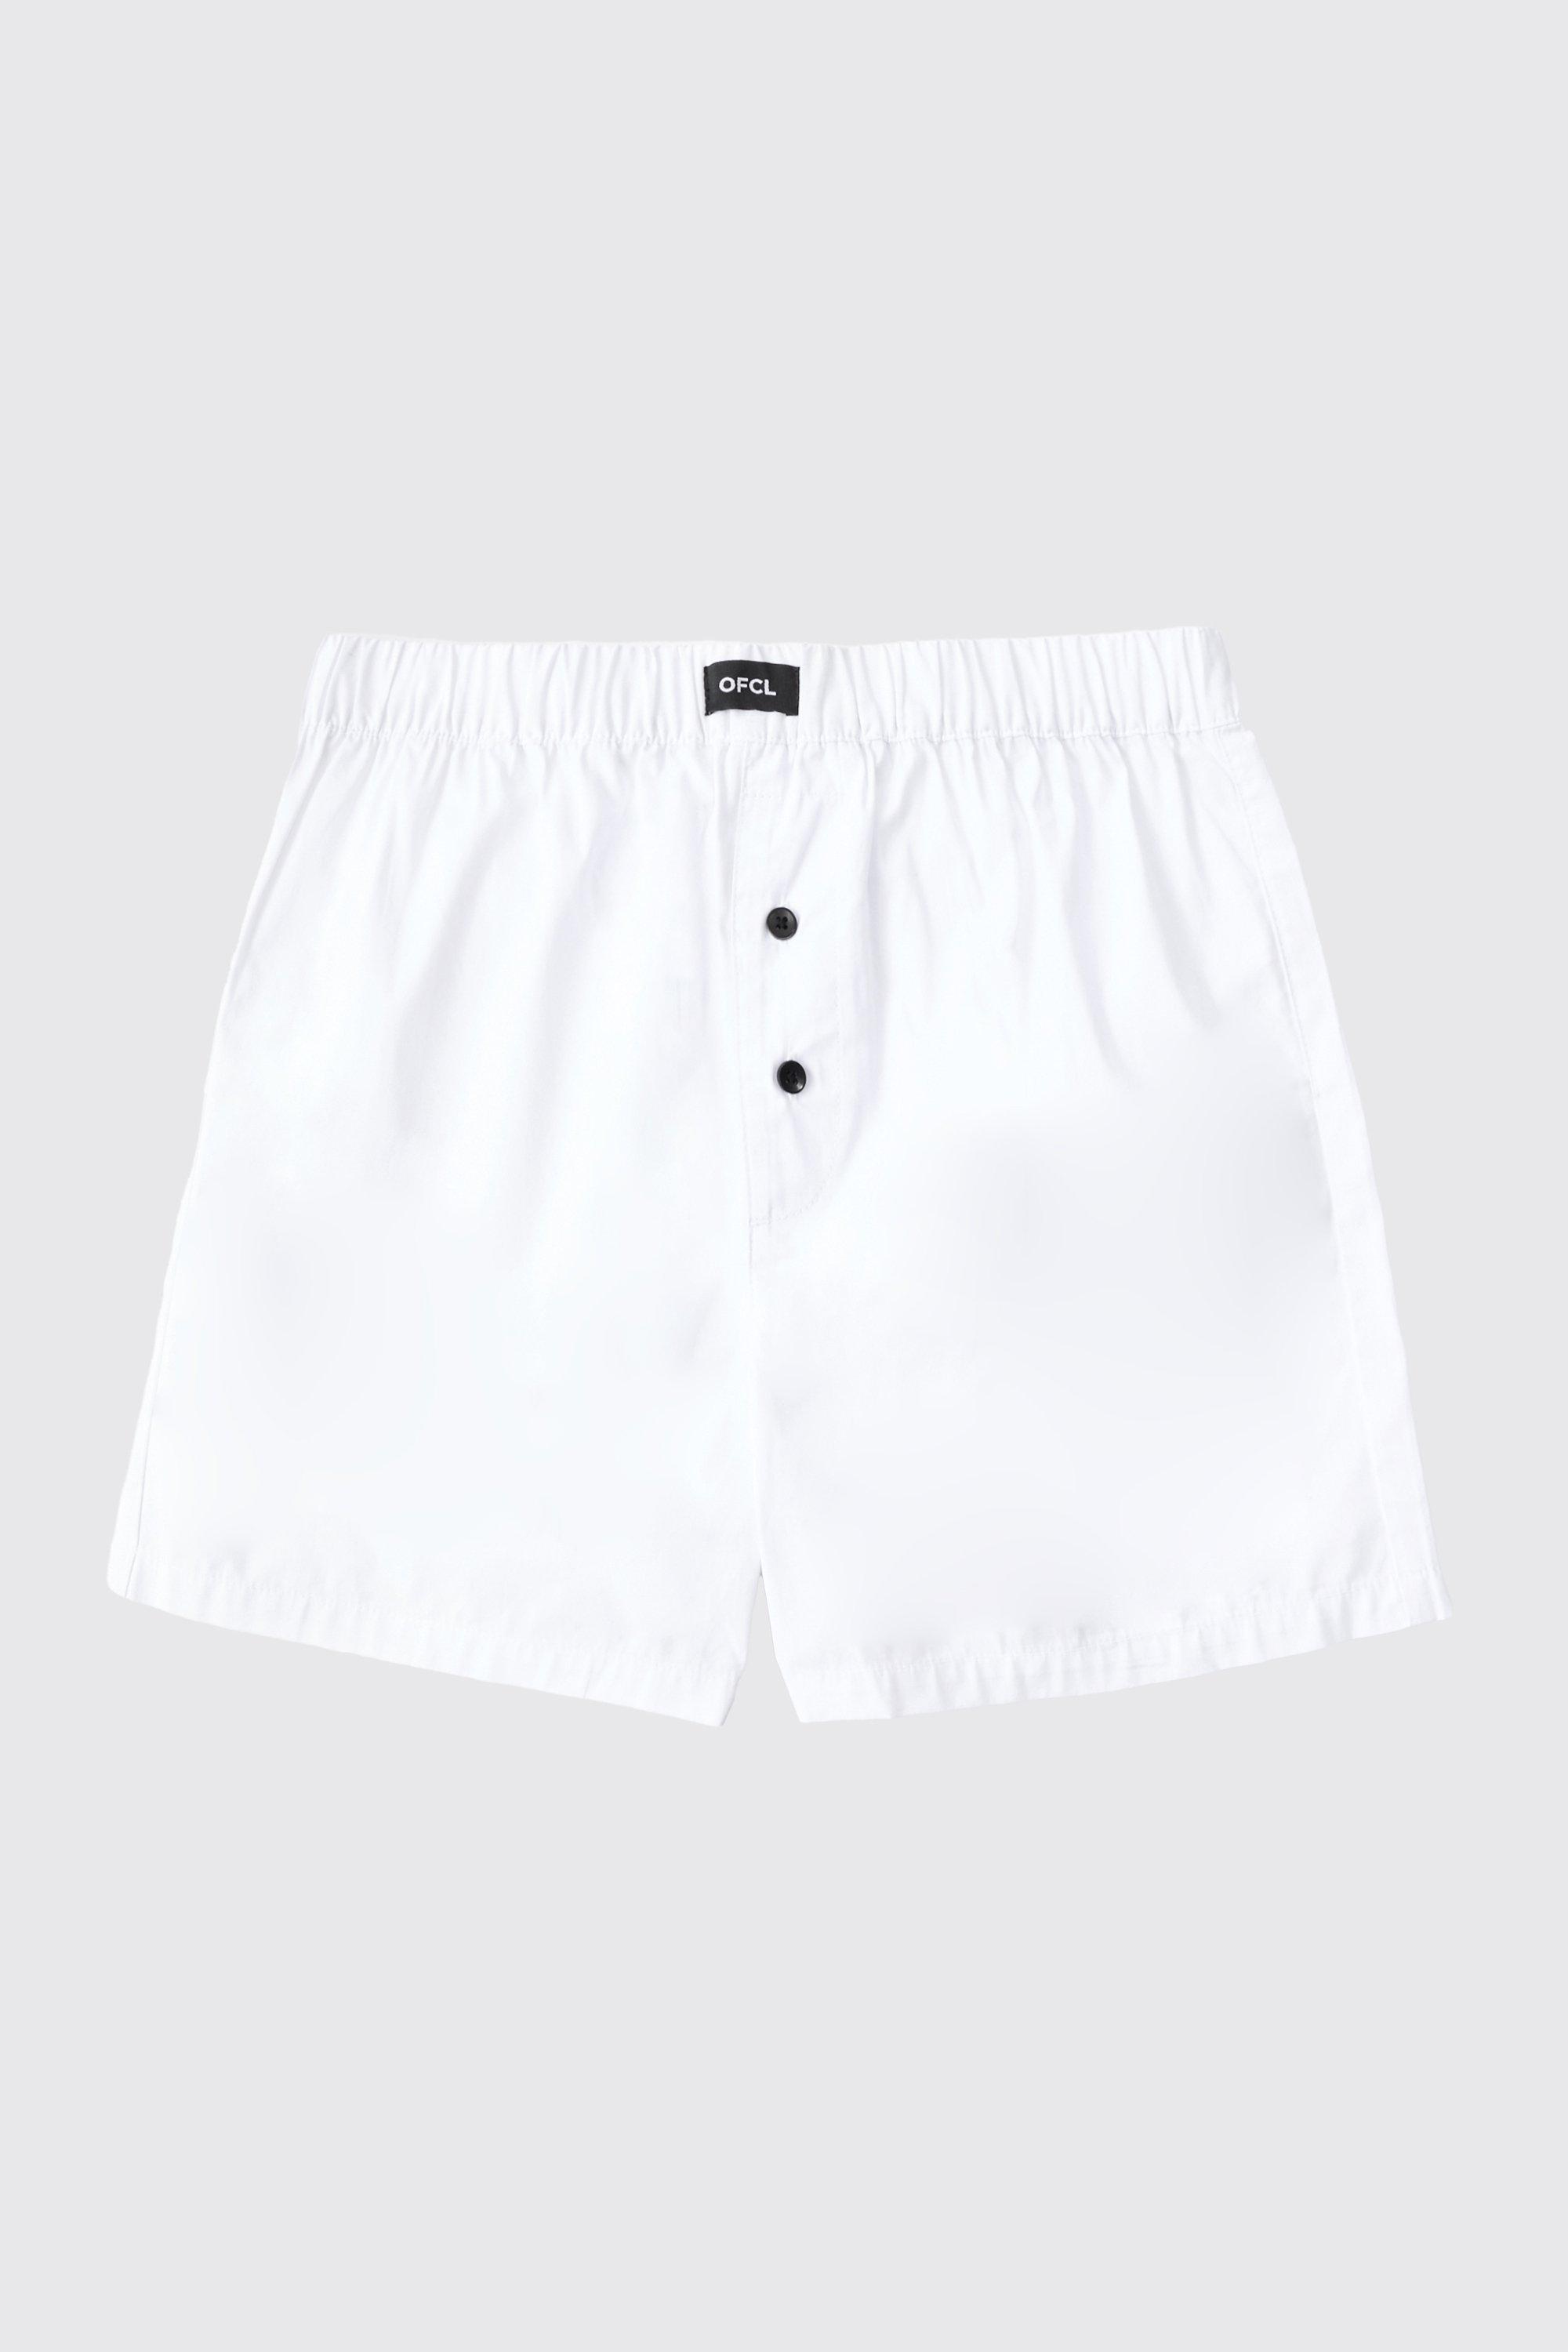 3 Pack Ofcl Woven Boxer Shorts